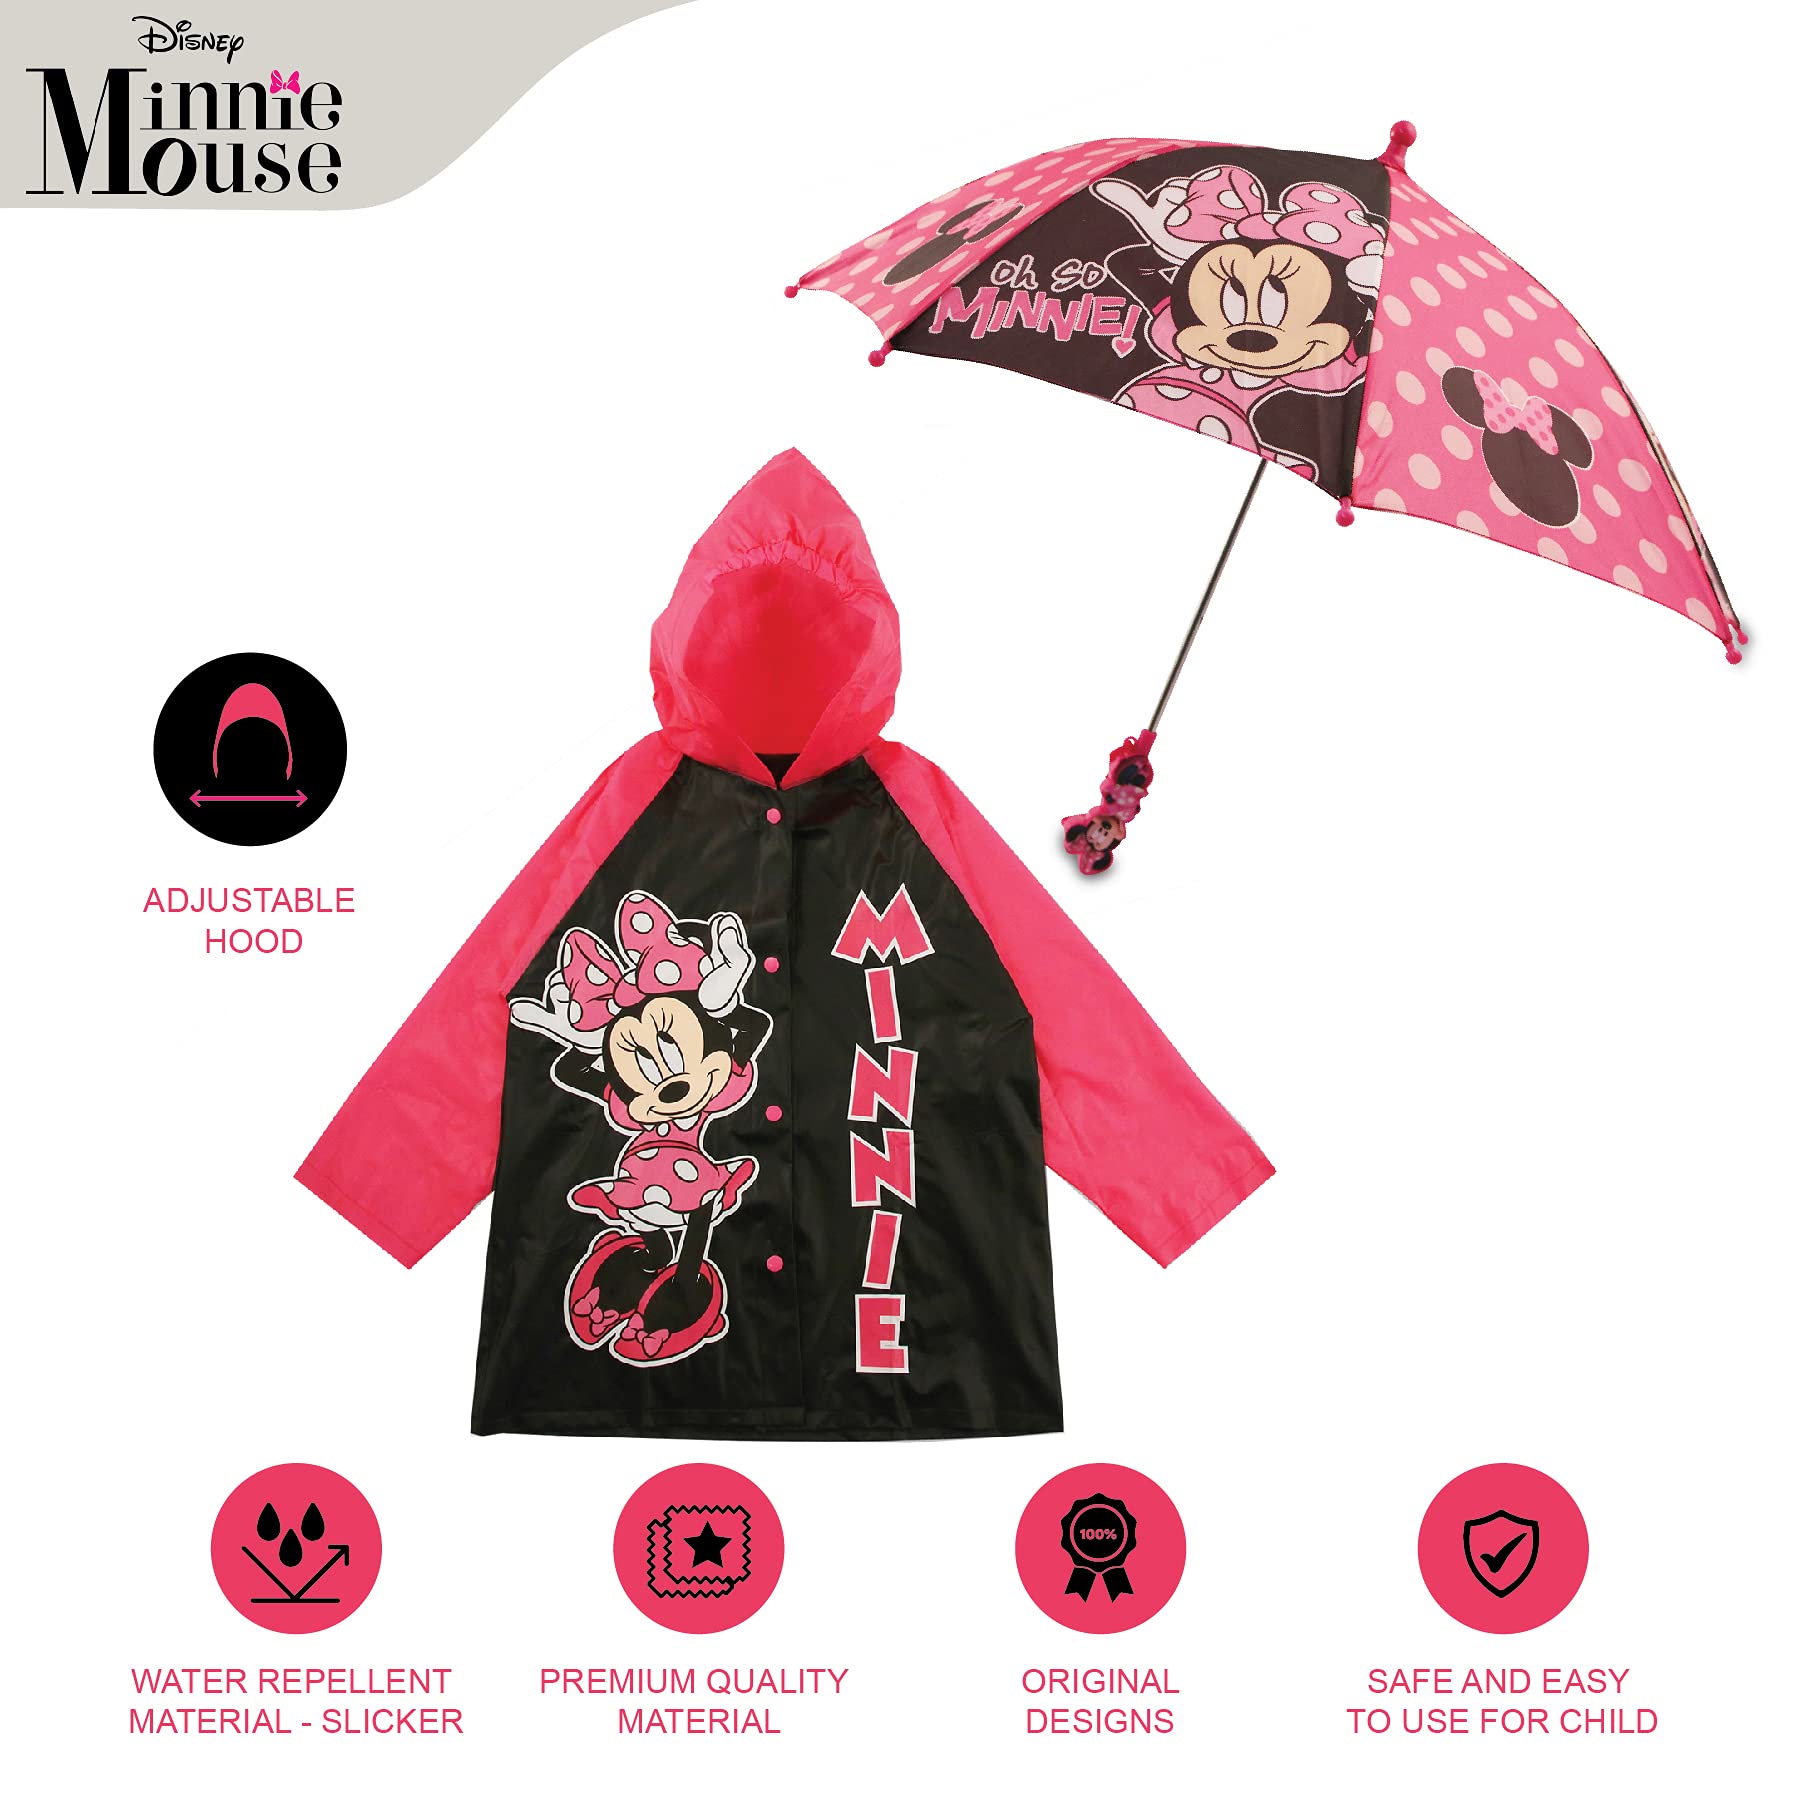 Disney Minnie Mouse Kids Umbrella with Matching Rain Poncho for Girls Ages 2-7 - image 4 of 8